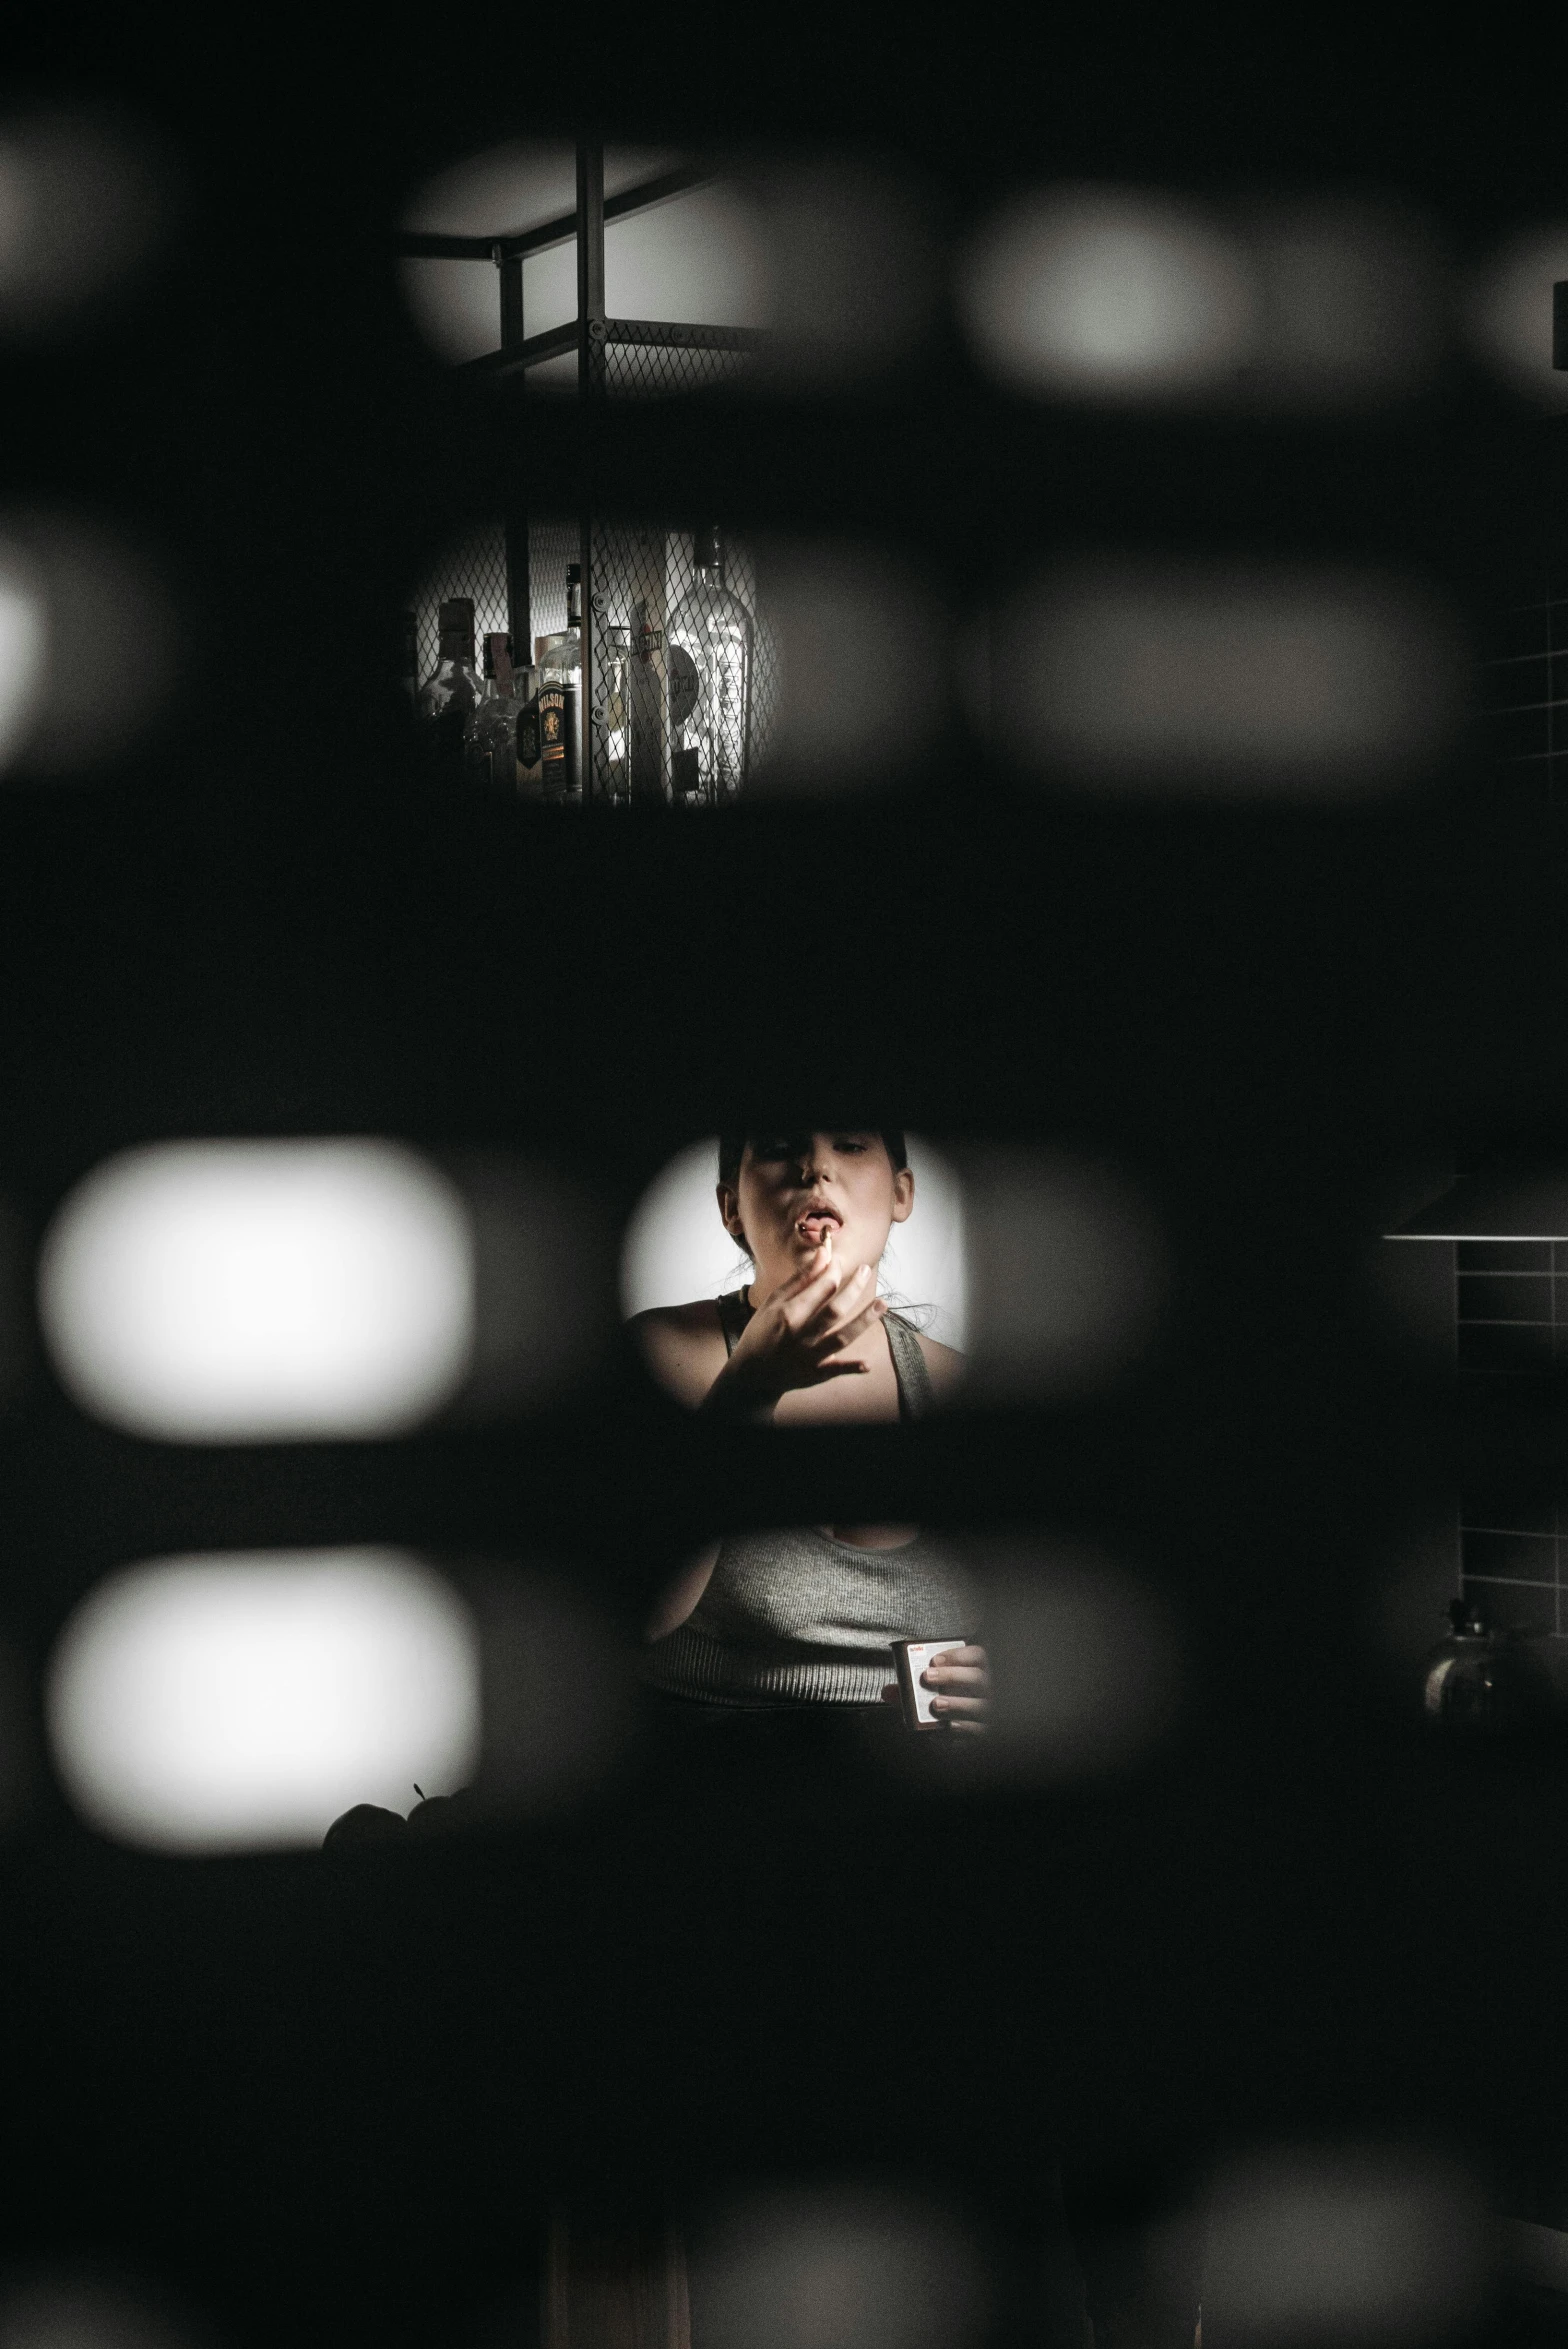 a man that is standing in front of a mirror, pexels contest winner, light and space, the woman is behind bars, drinking, spotlight from above, low iso